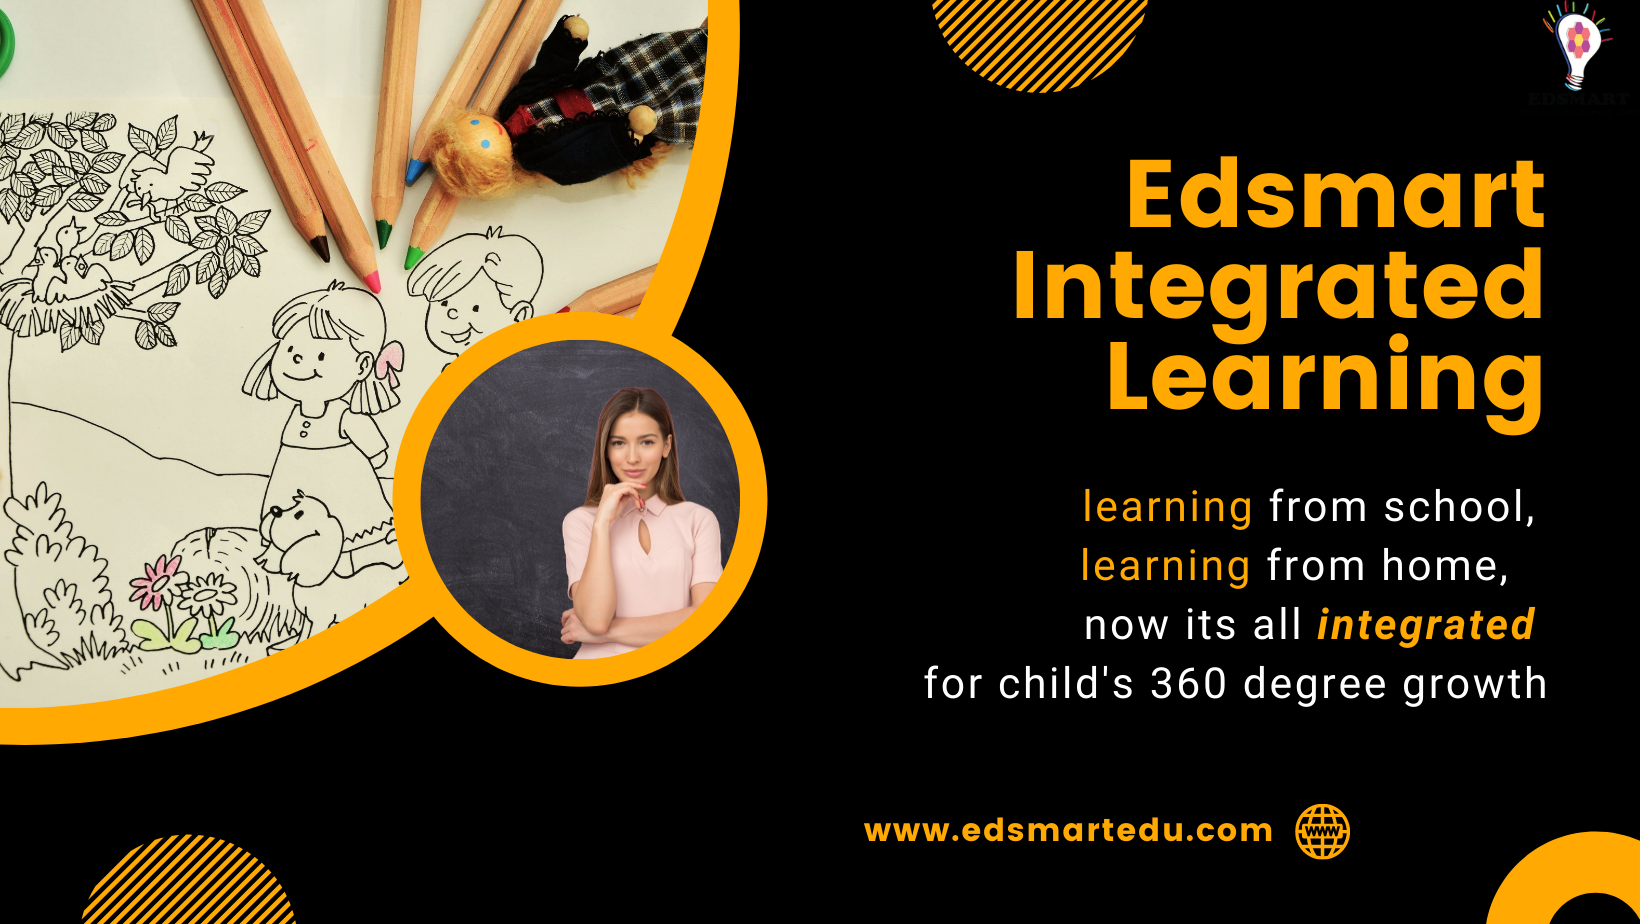 Edsmart Integrated Learning